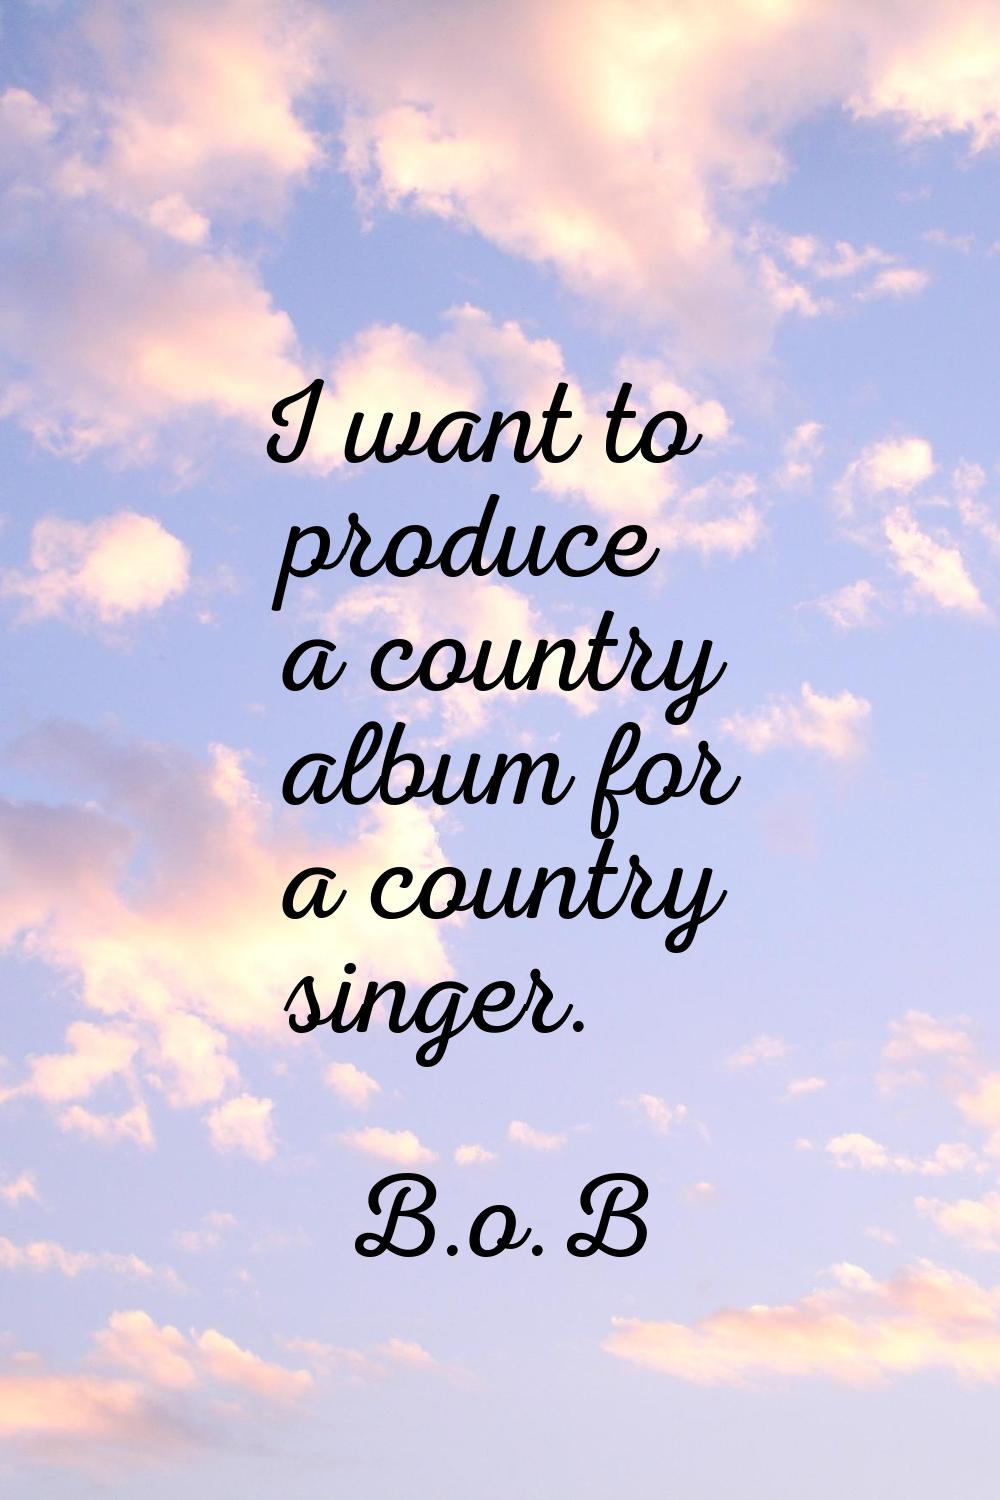 I want to produce a country album for a country singer.